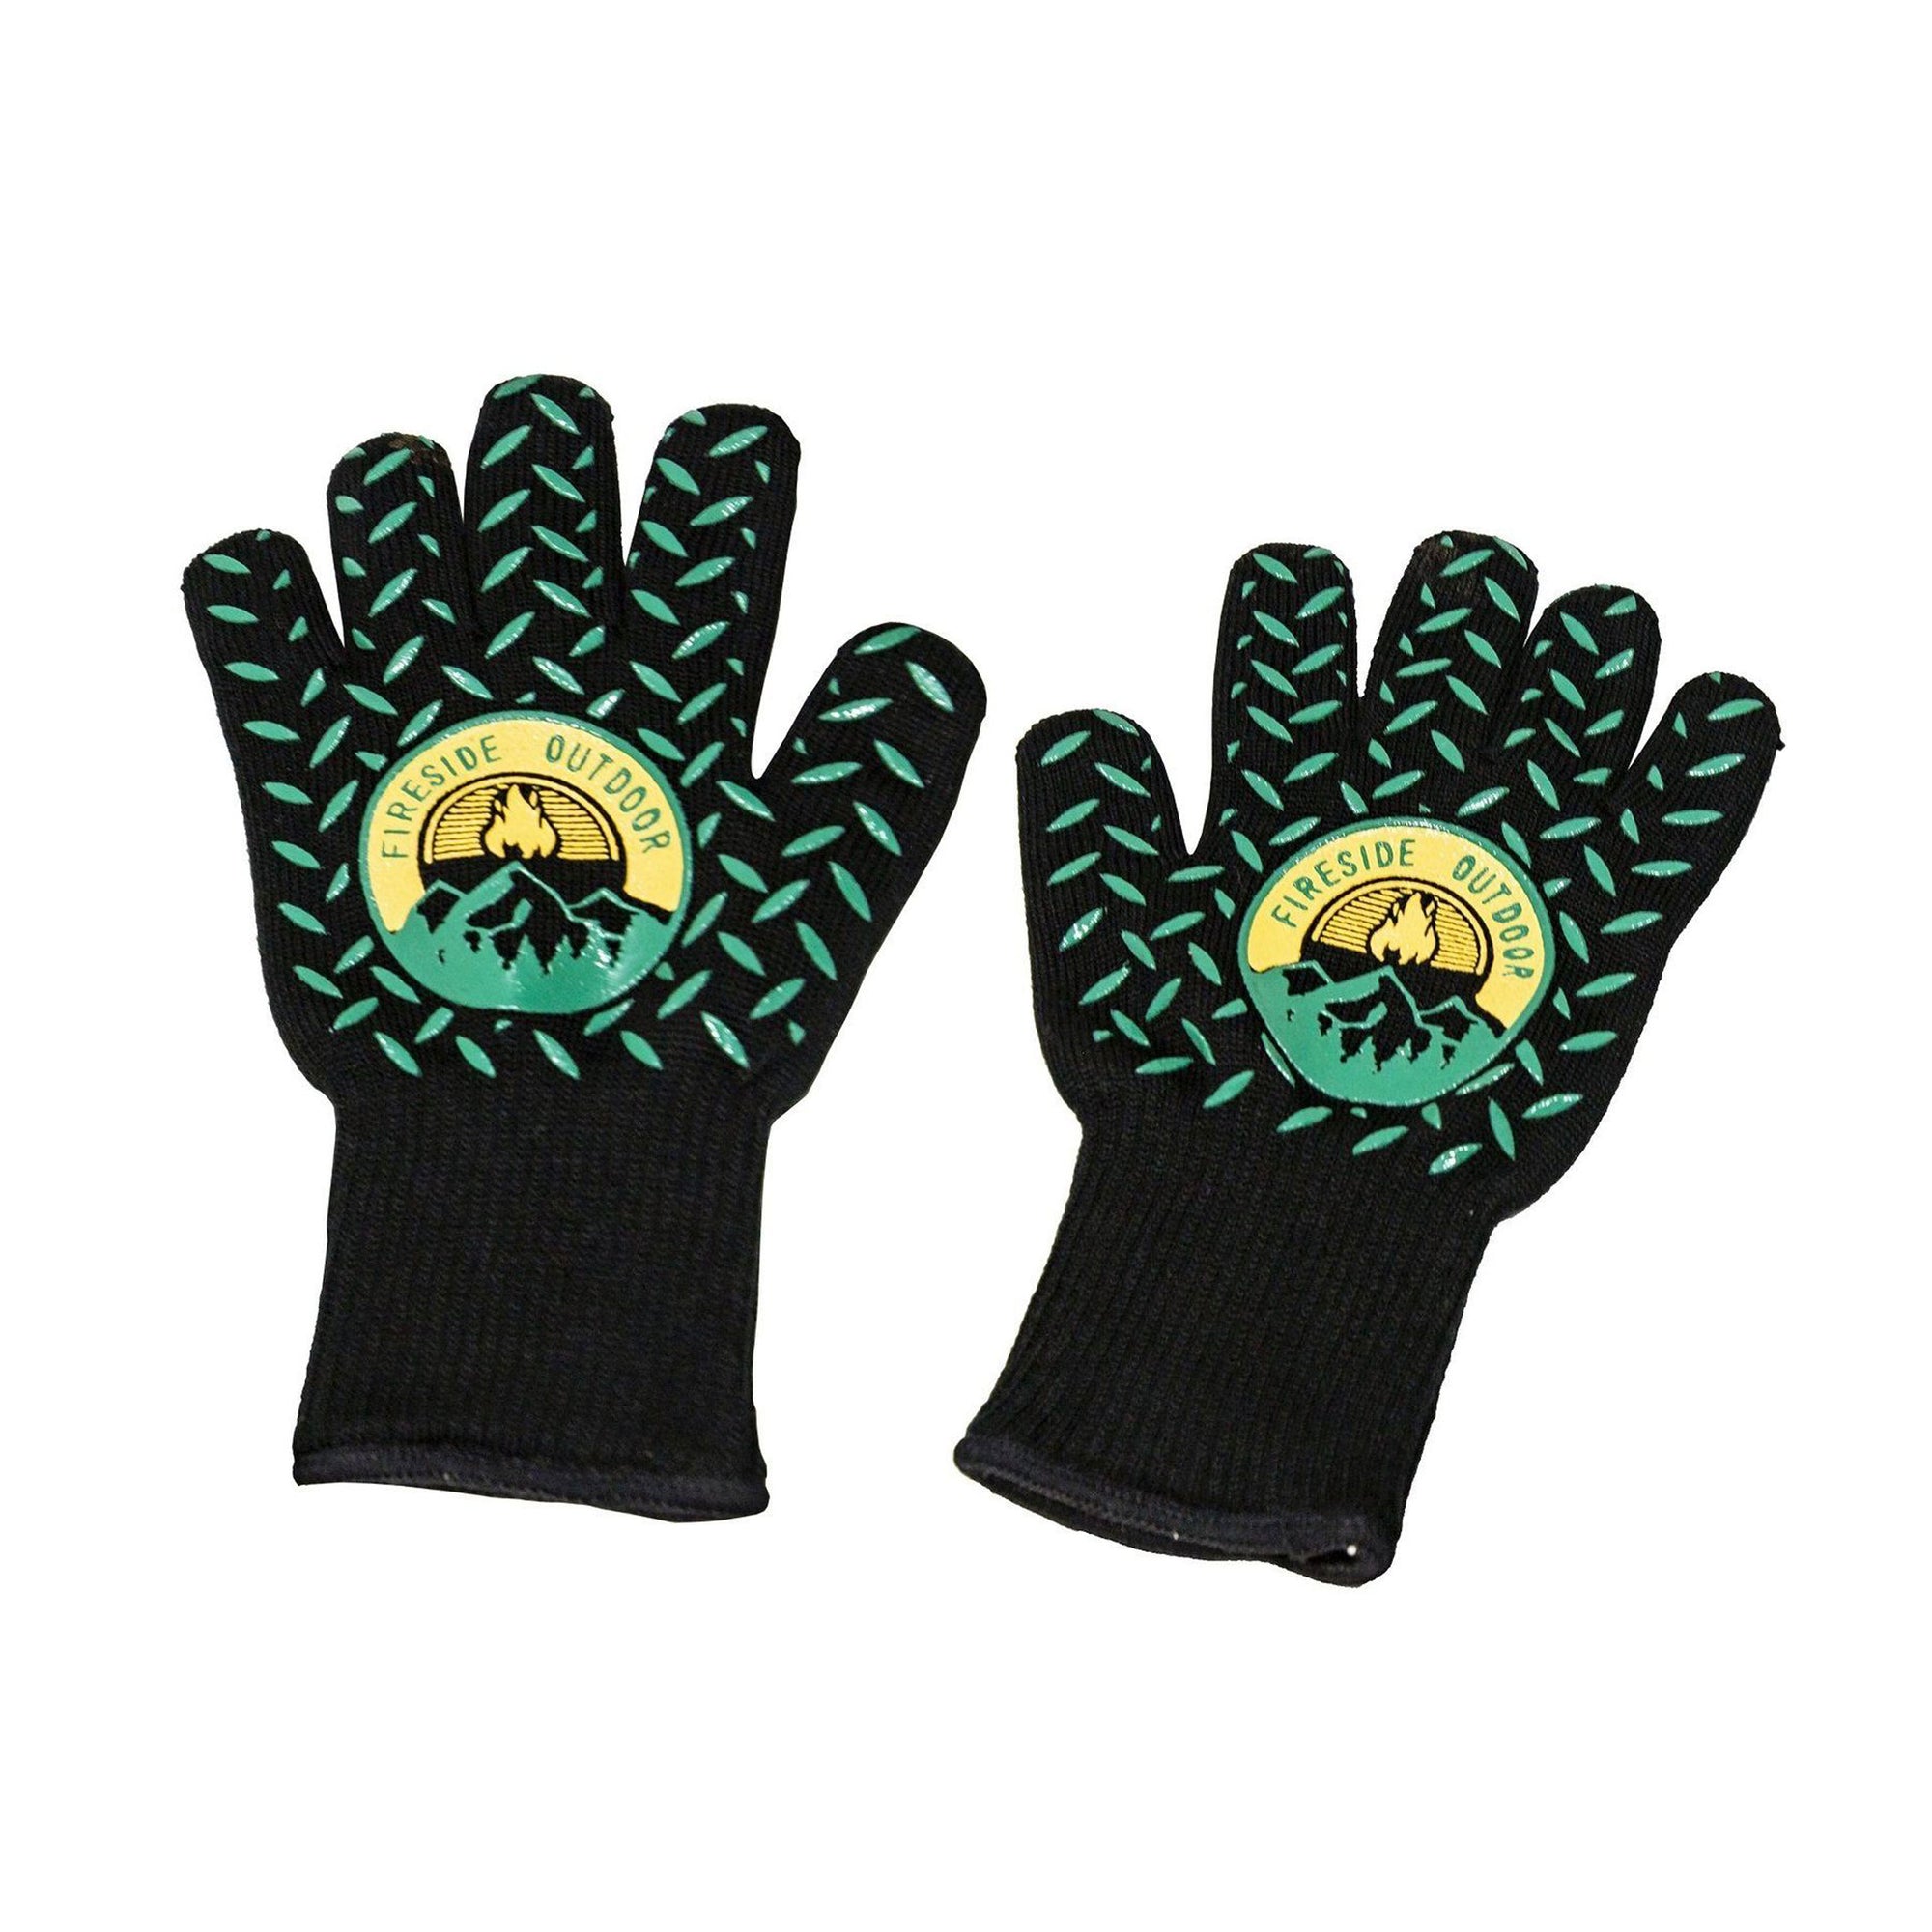 Fireside Outdoor CDFPG Thermal Protection Gloves